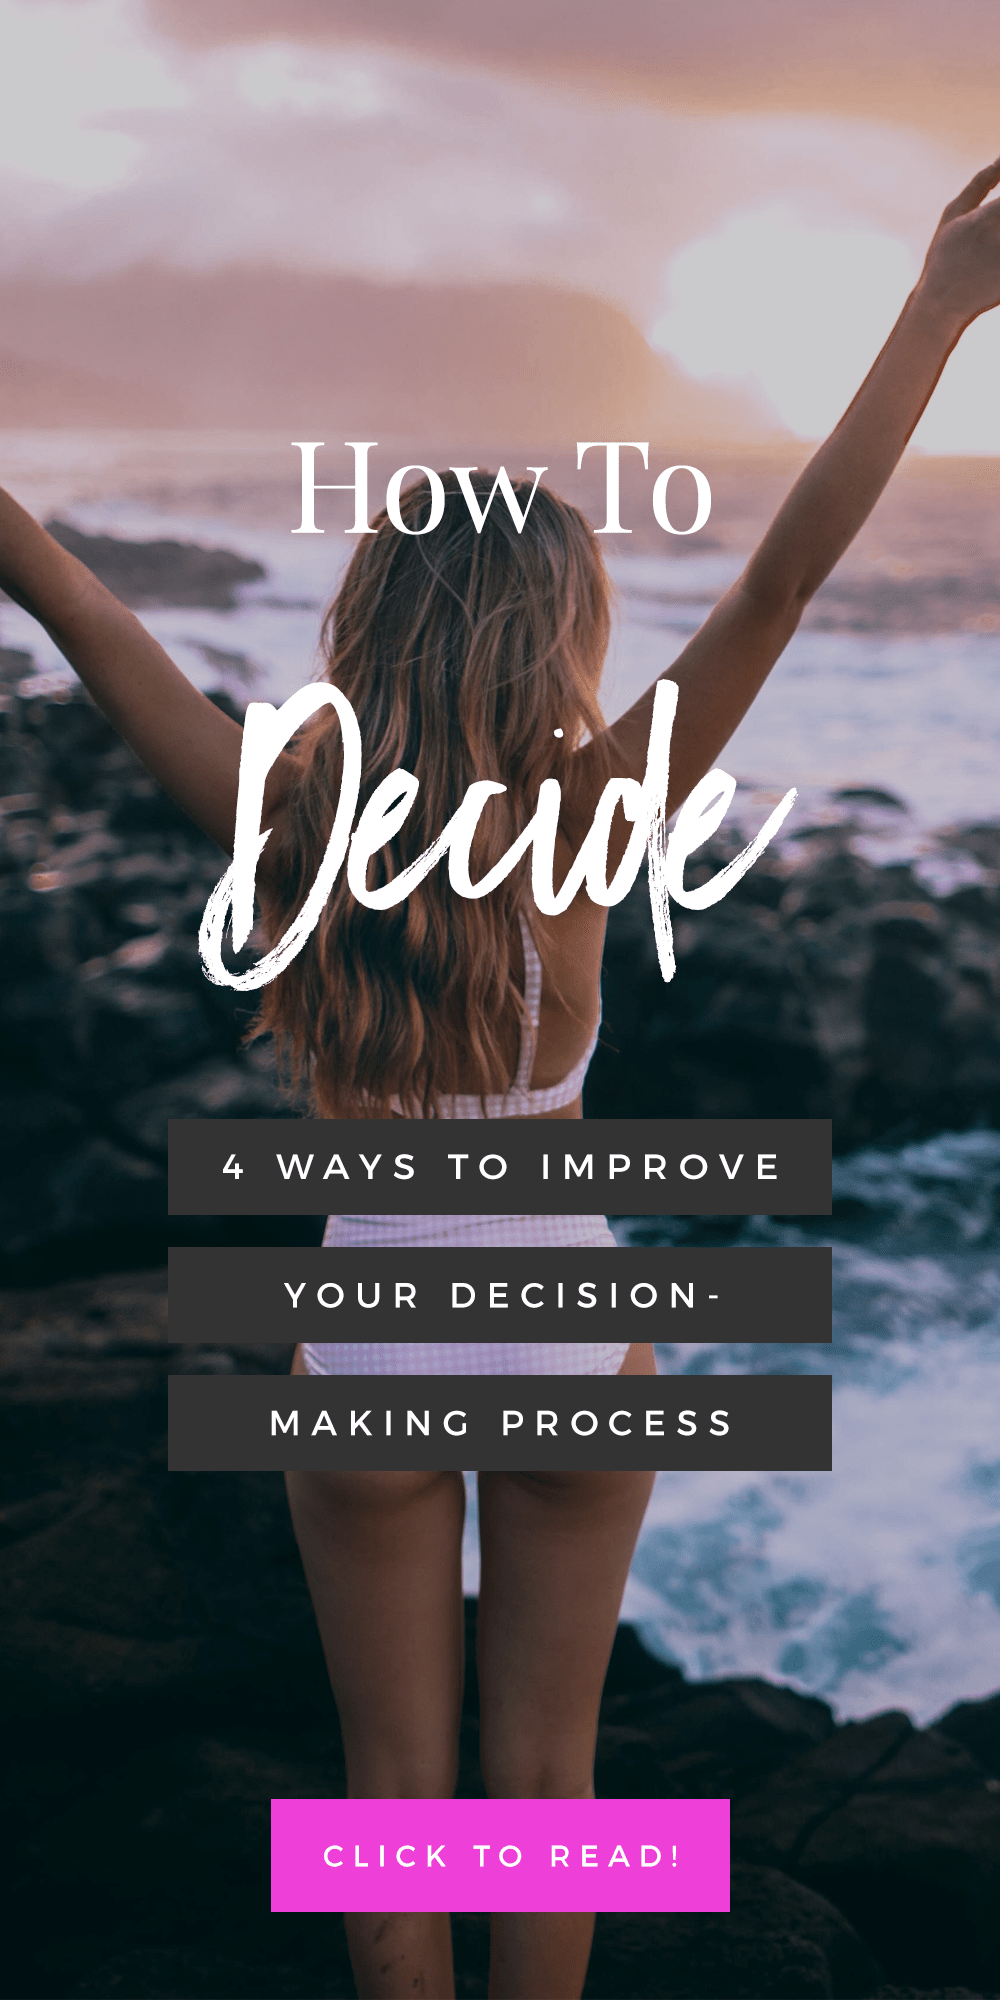 How To Decide: 4 Ways To Improve Your Decision-Making Process